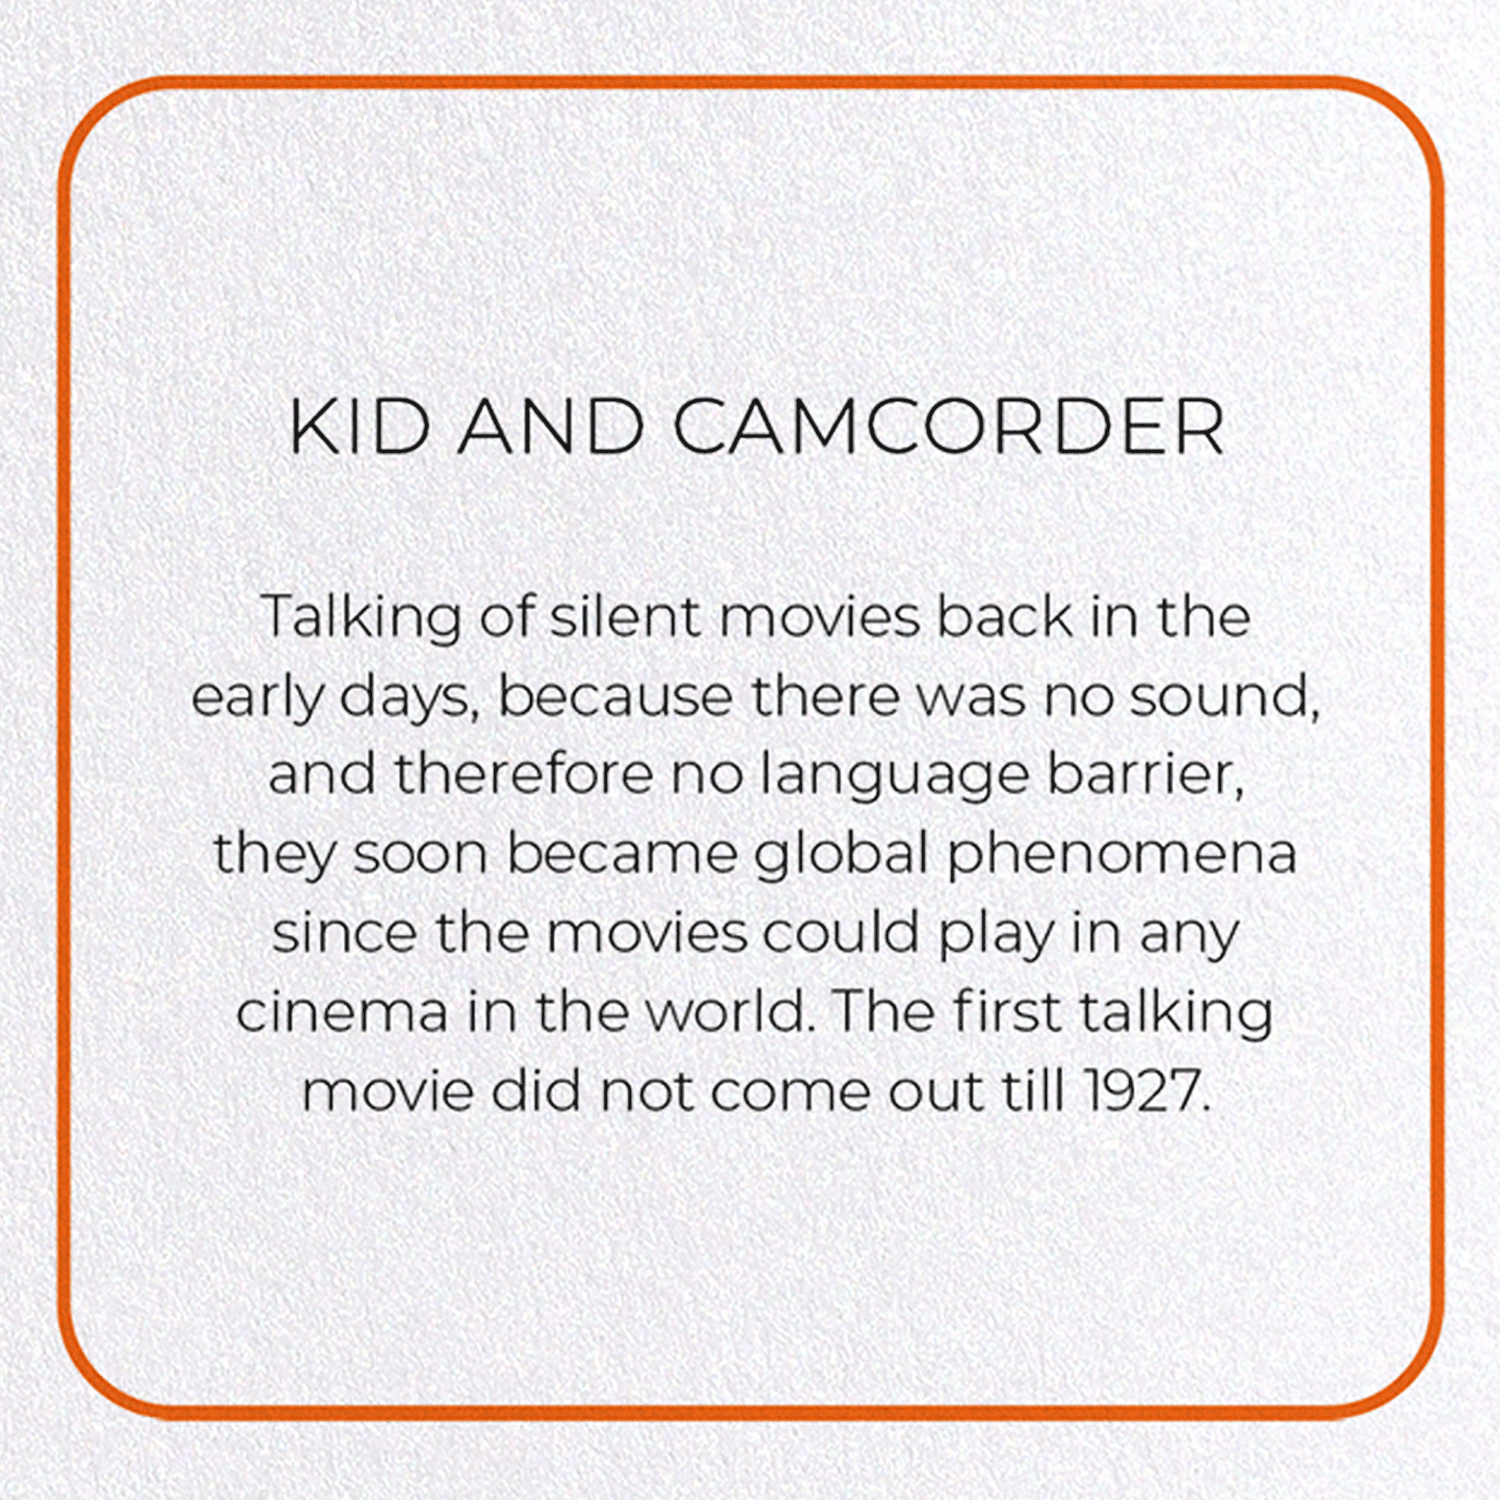 KID AND CAMCORDER